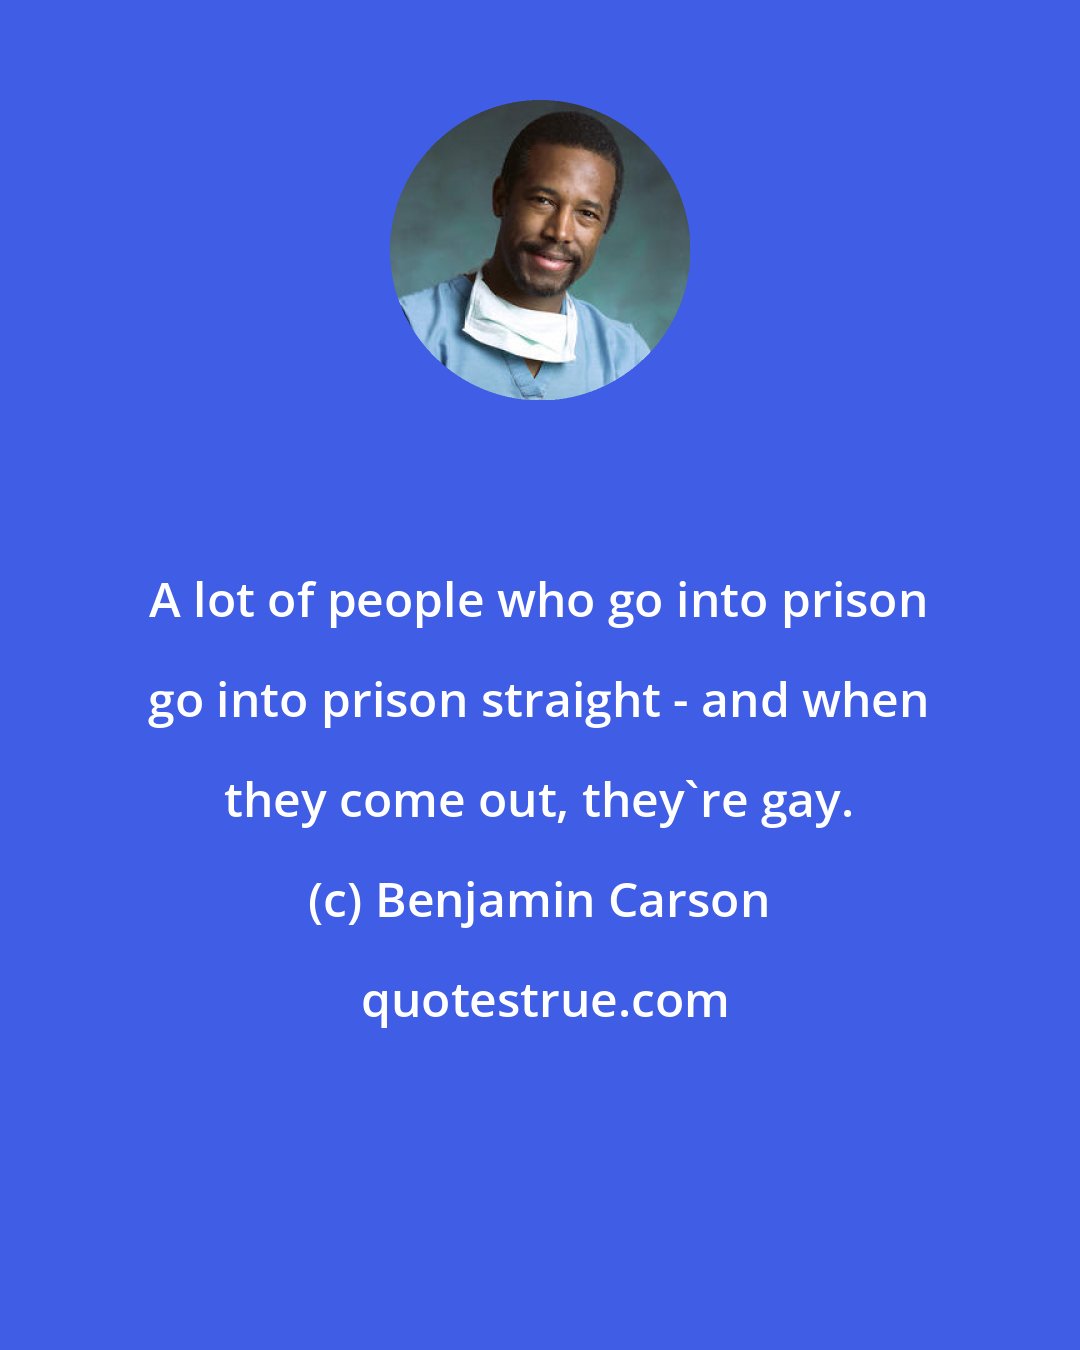 Benjamin Carson: A lot of people who go into prison go into prison straight - and when they come out, they're gay.